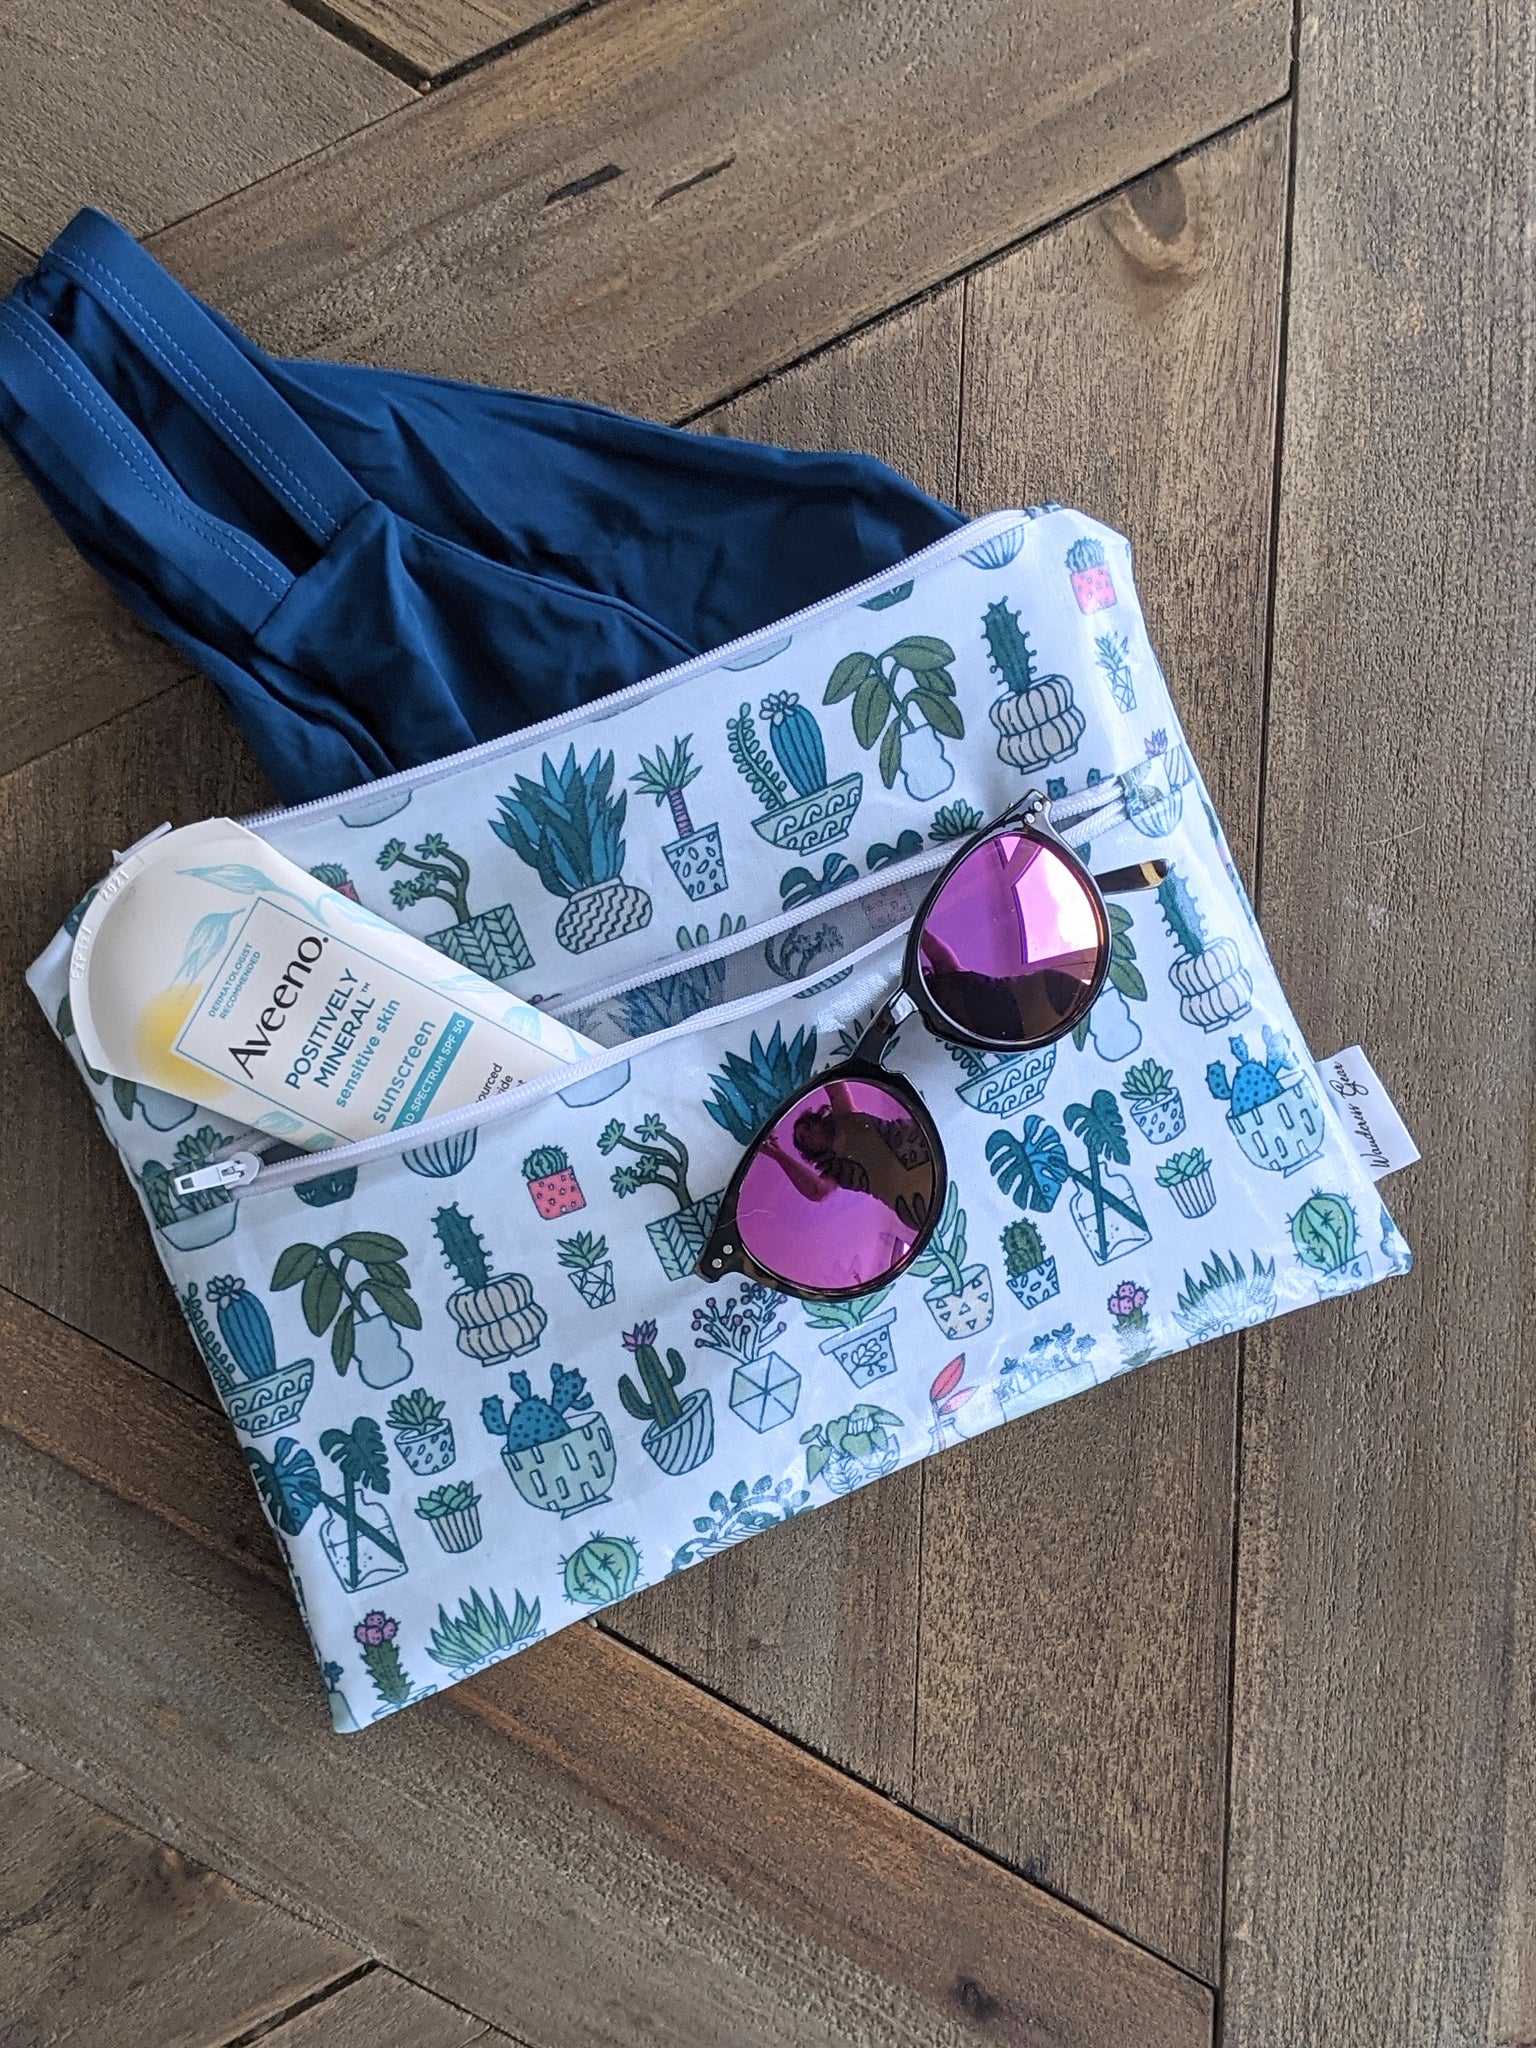 How to Make a Wet Bag - Spoonflower Blog